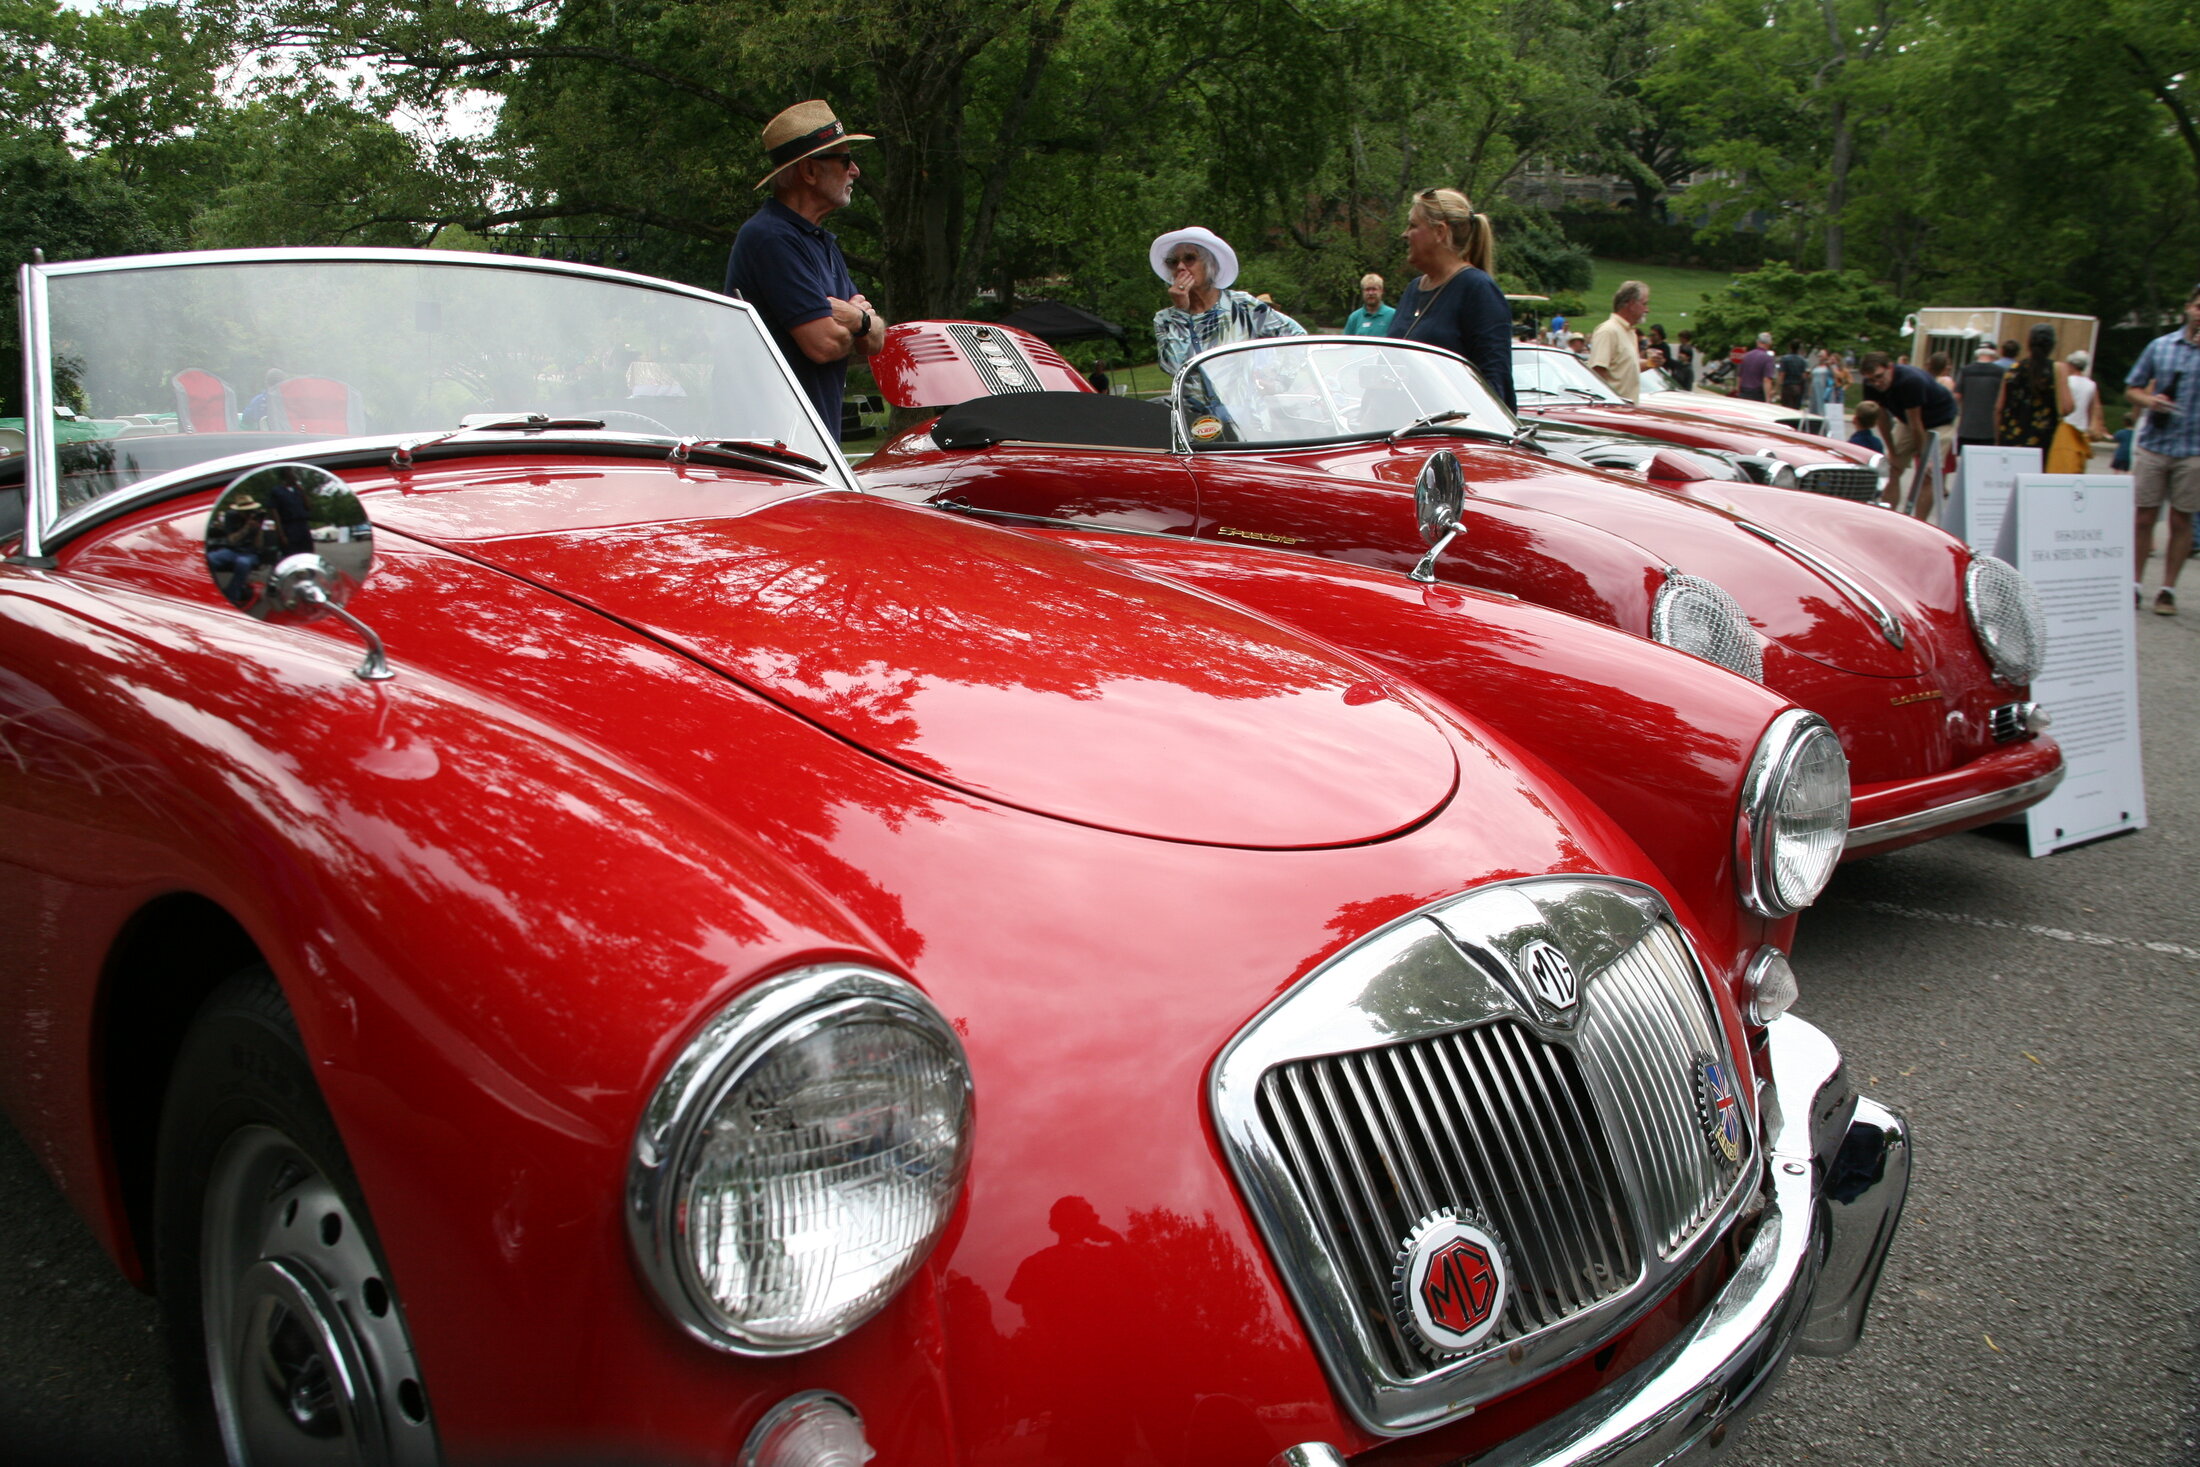 Exposition of Elegance- Classic Cars at Cheekwood in Nashville, TN.